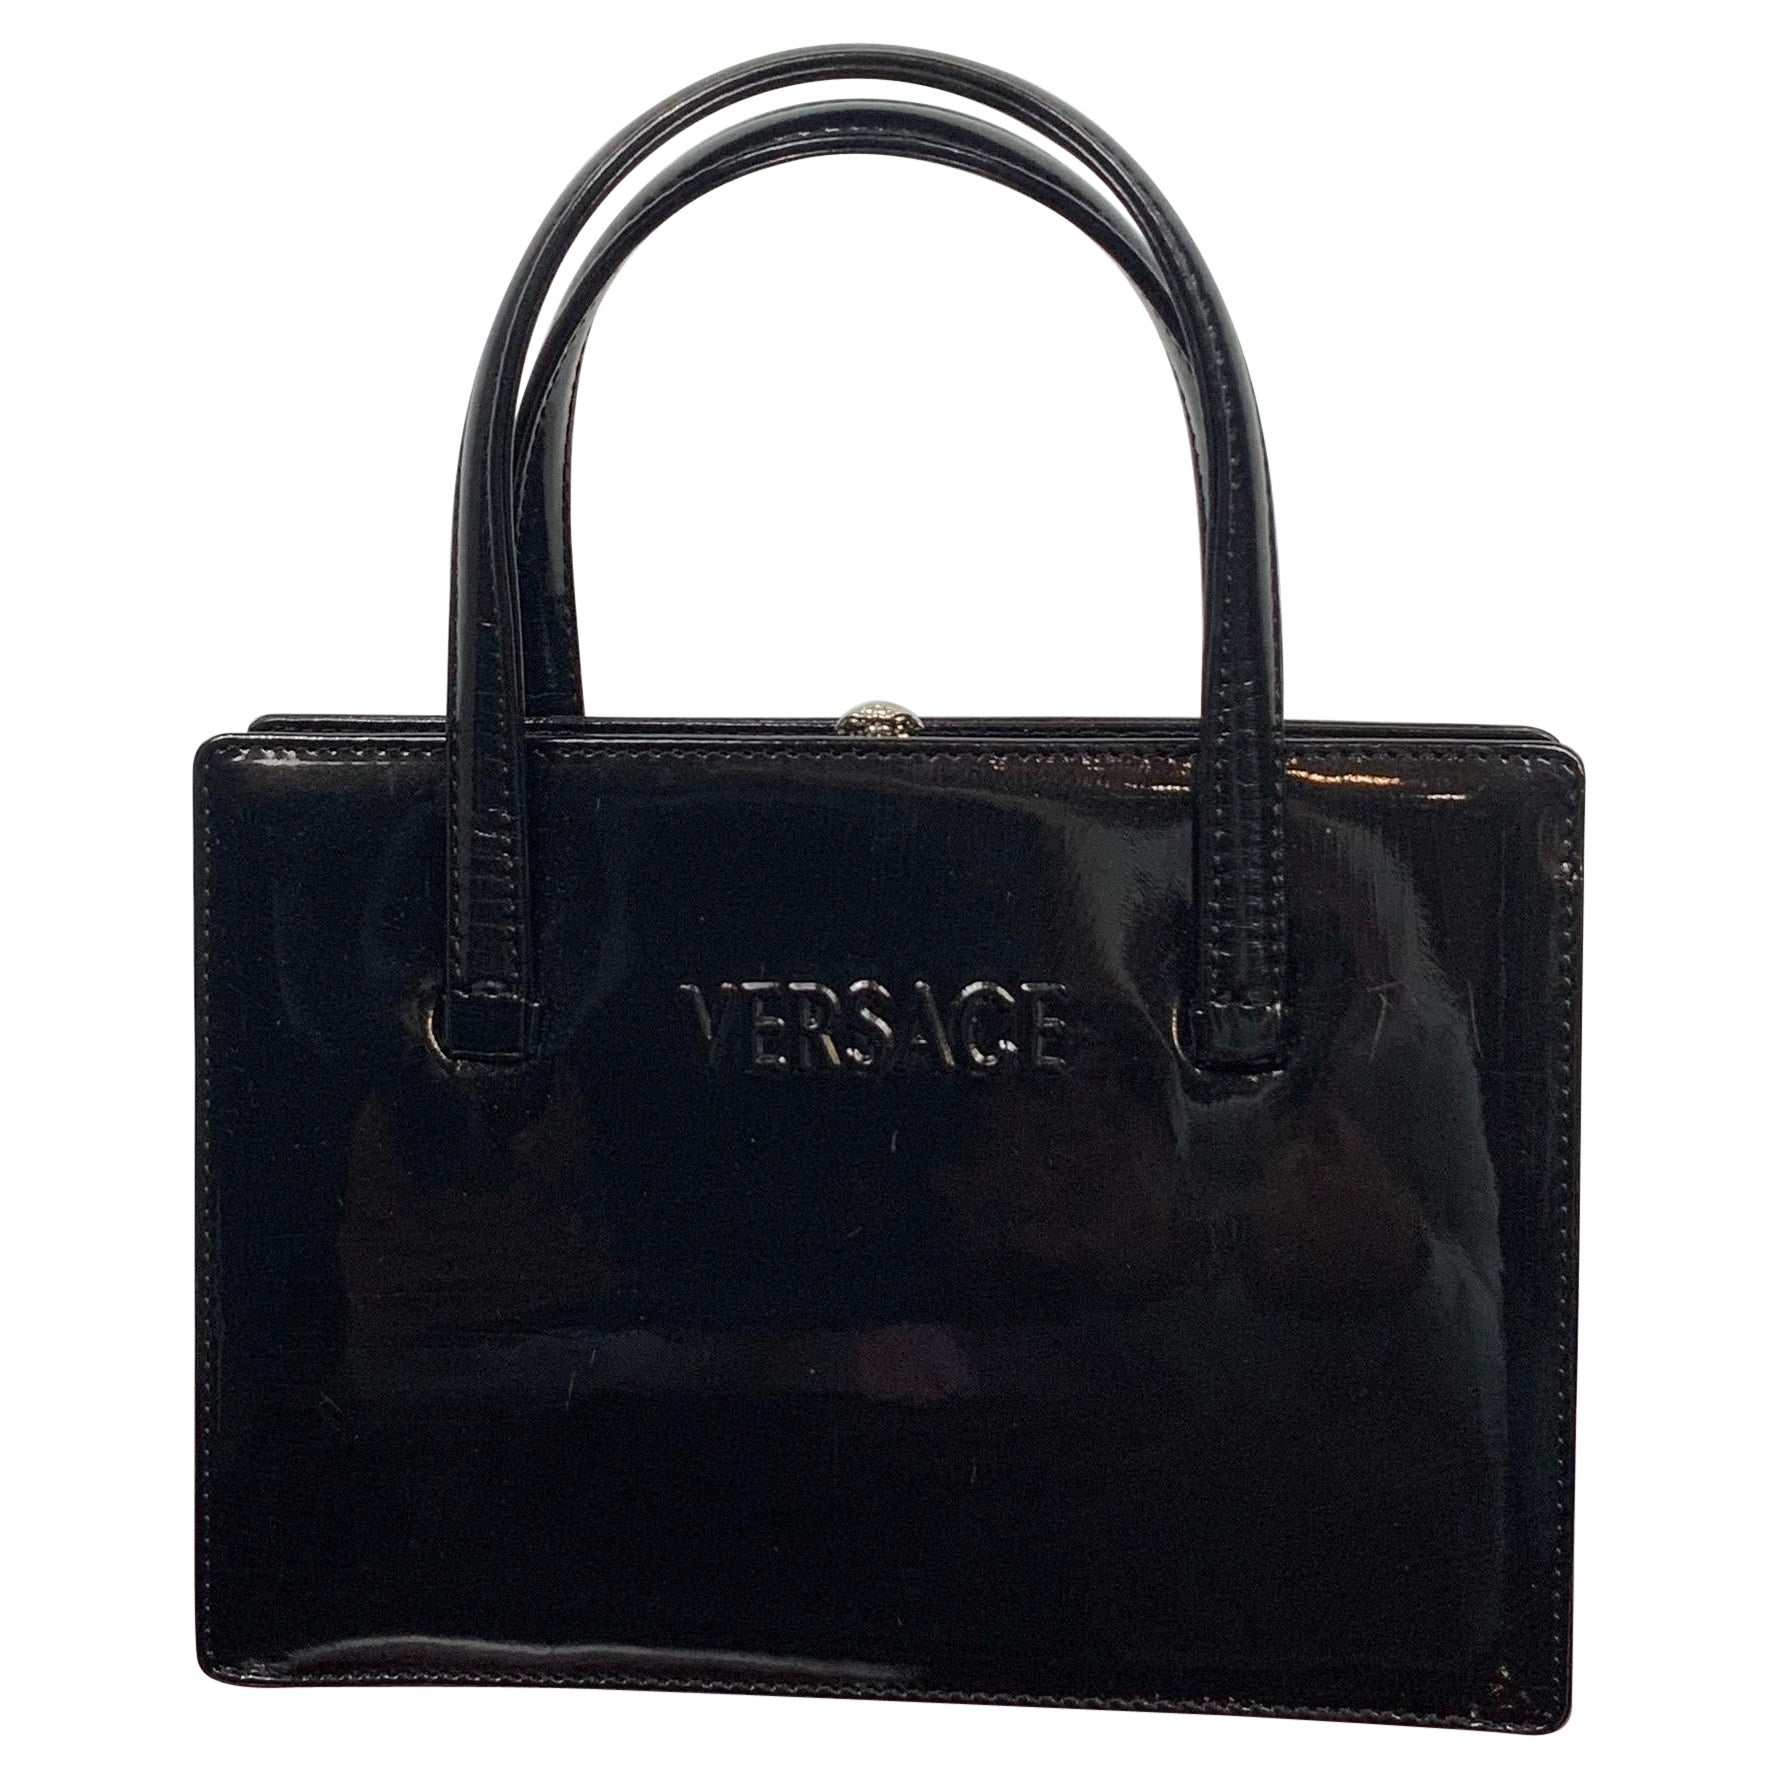 Gianni Versace patent leather bag 